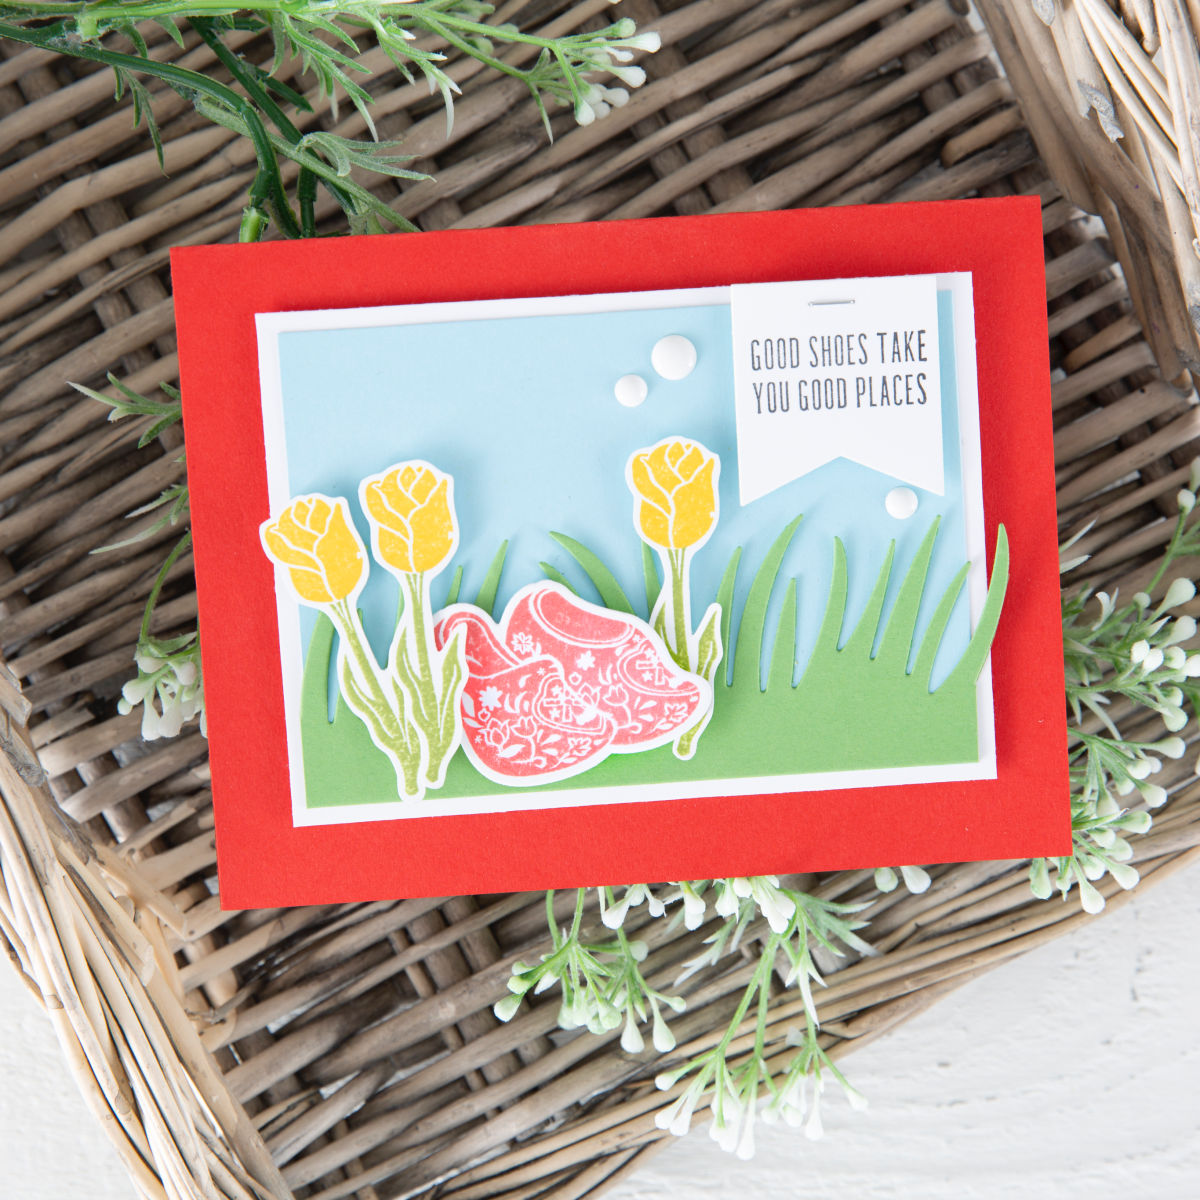 Good Shoes Take You Good Places handmade card with Fun Stampers Journey March 2019 Stamp of the Month, called Good Places. The wooden clogs and tulips are darling nested in die cut grass. #funstampersjourney #diecutting